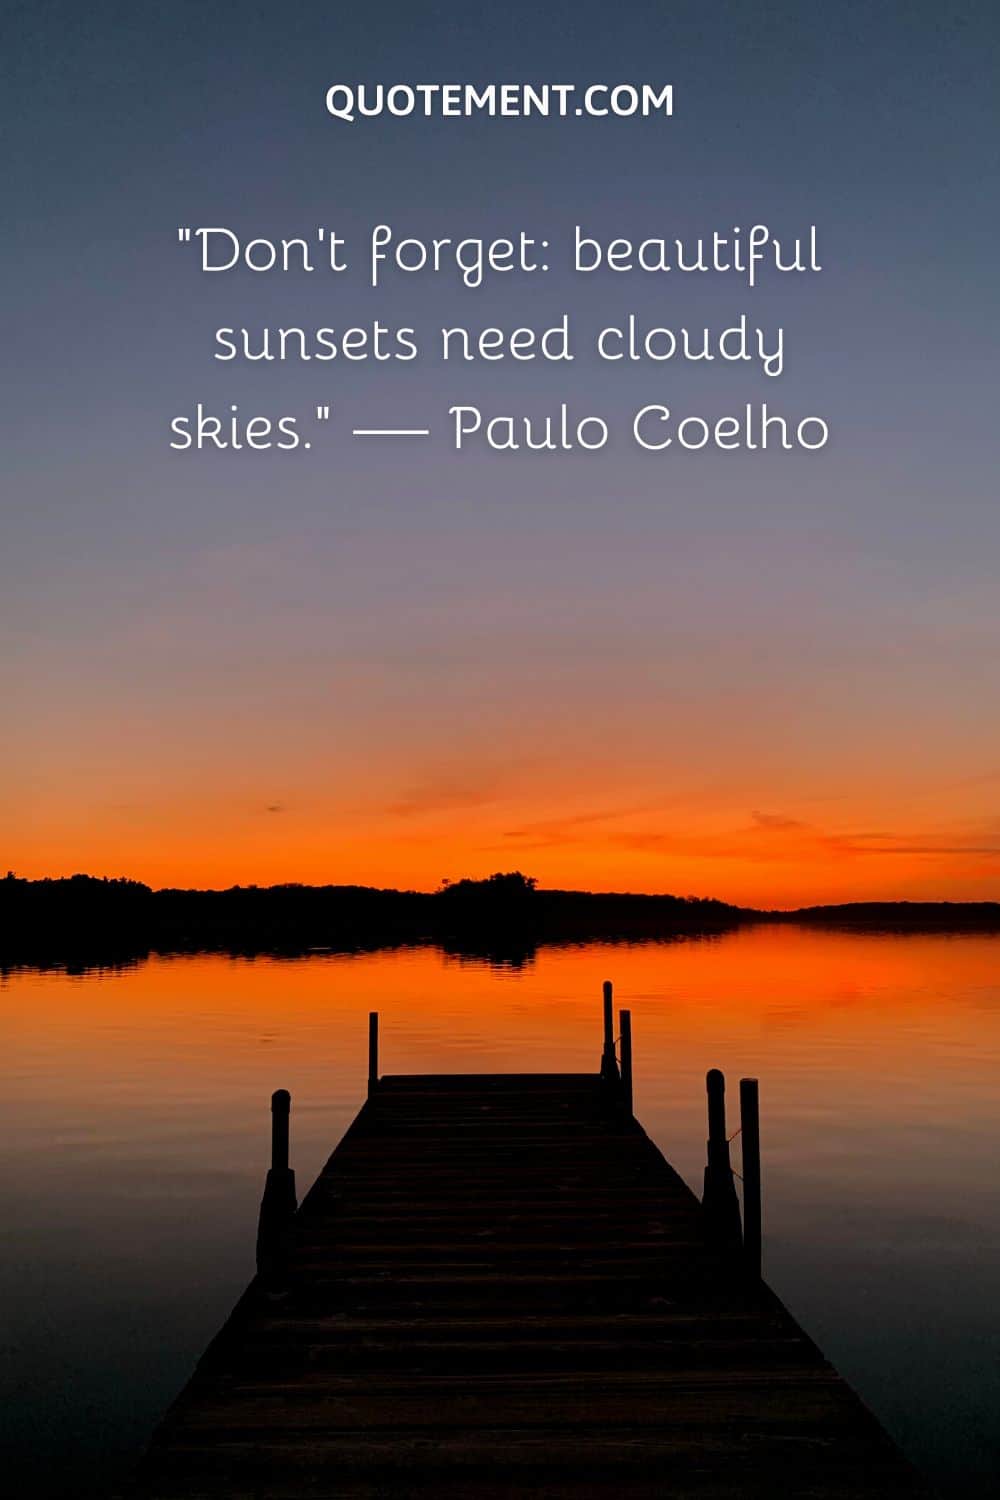 “Don’t forget beautiful sunsets need cloudy skies.” — Paulo Coelho